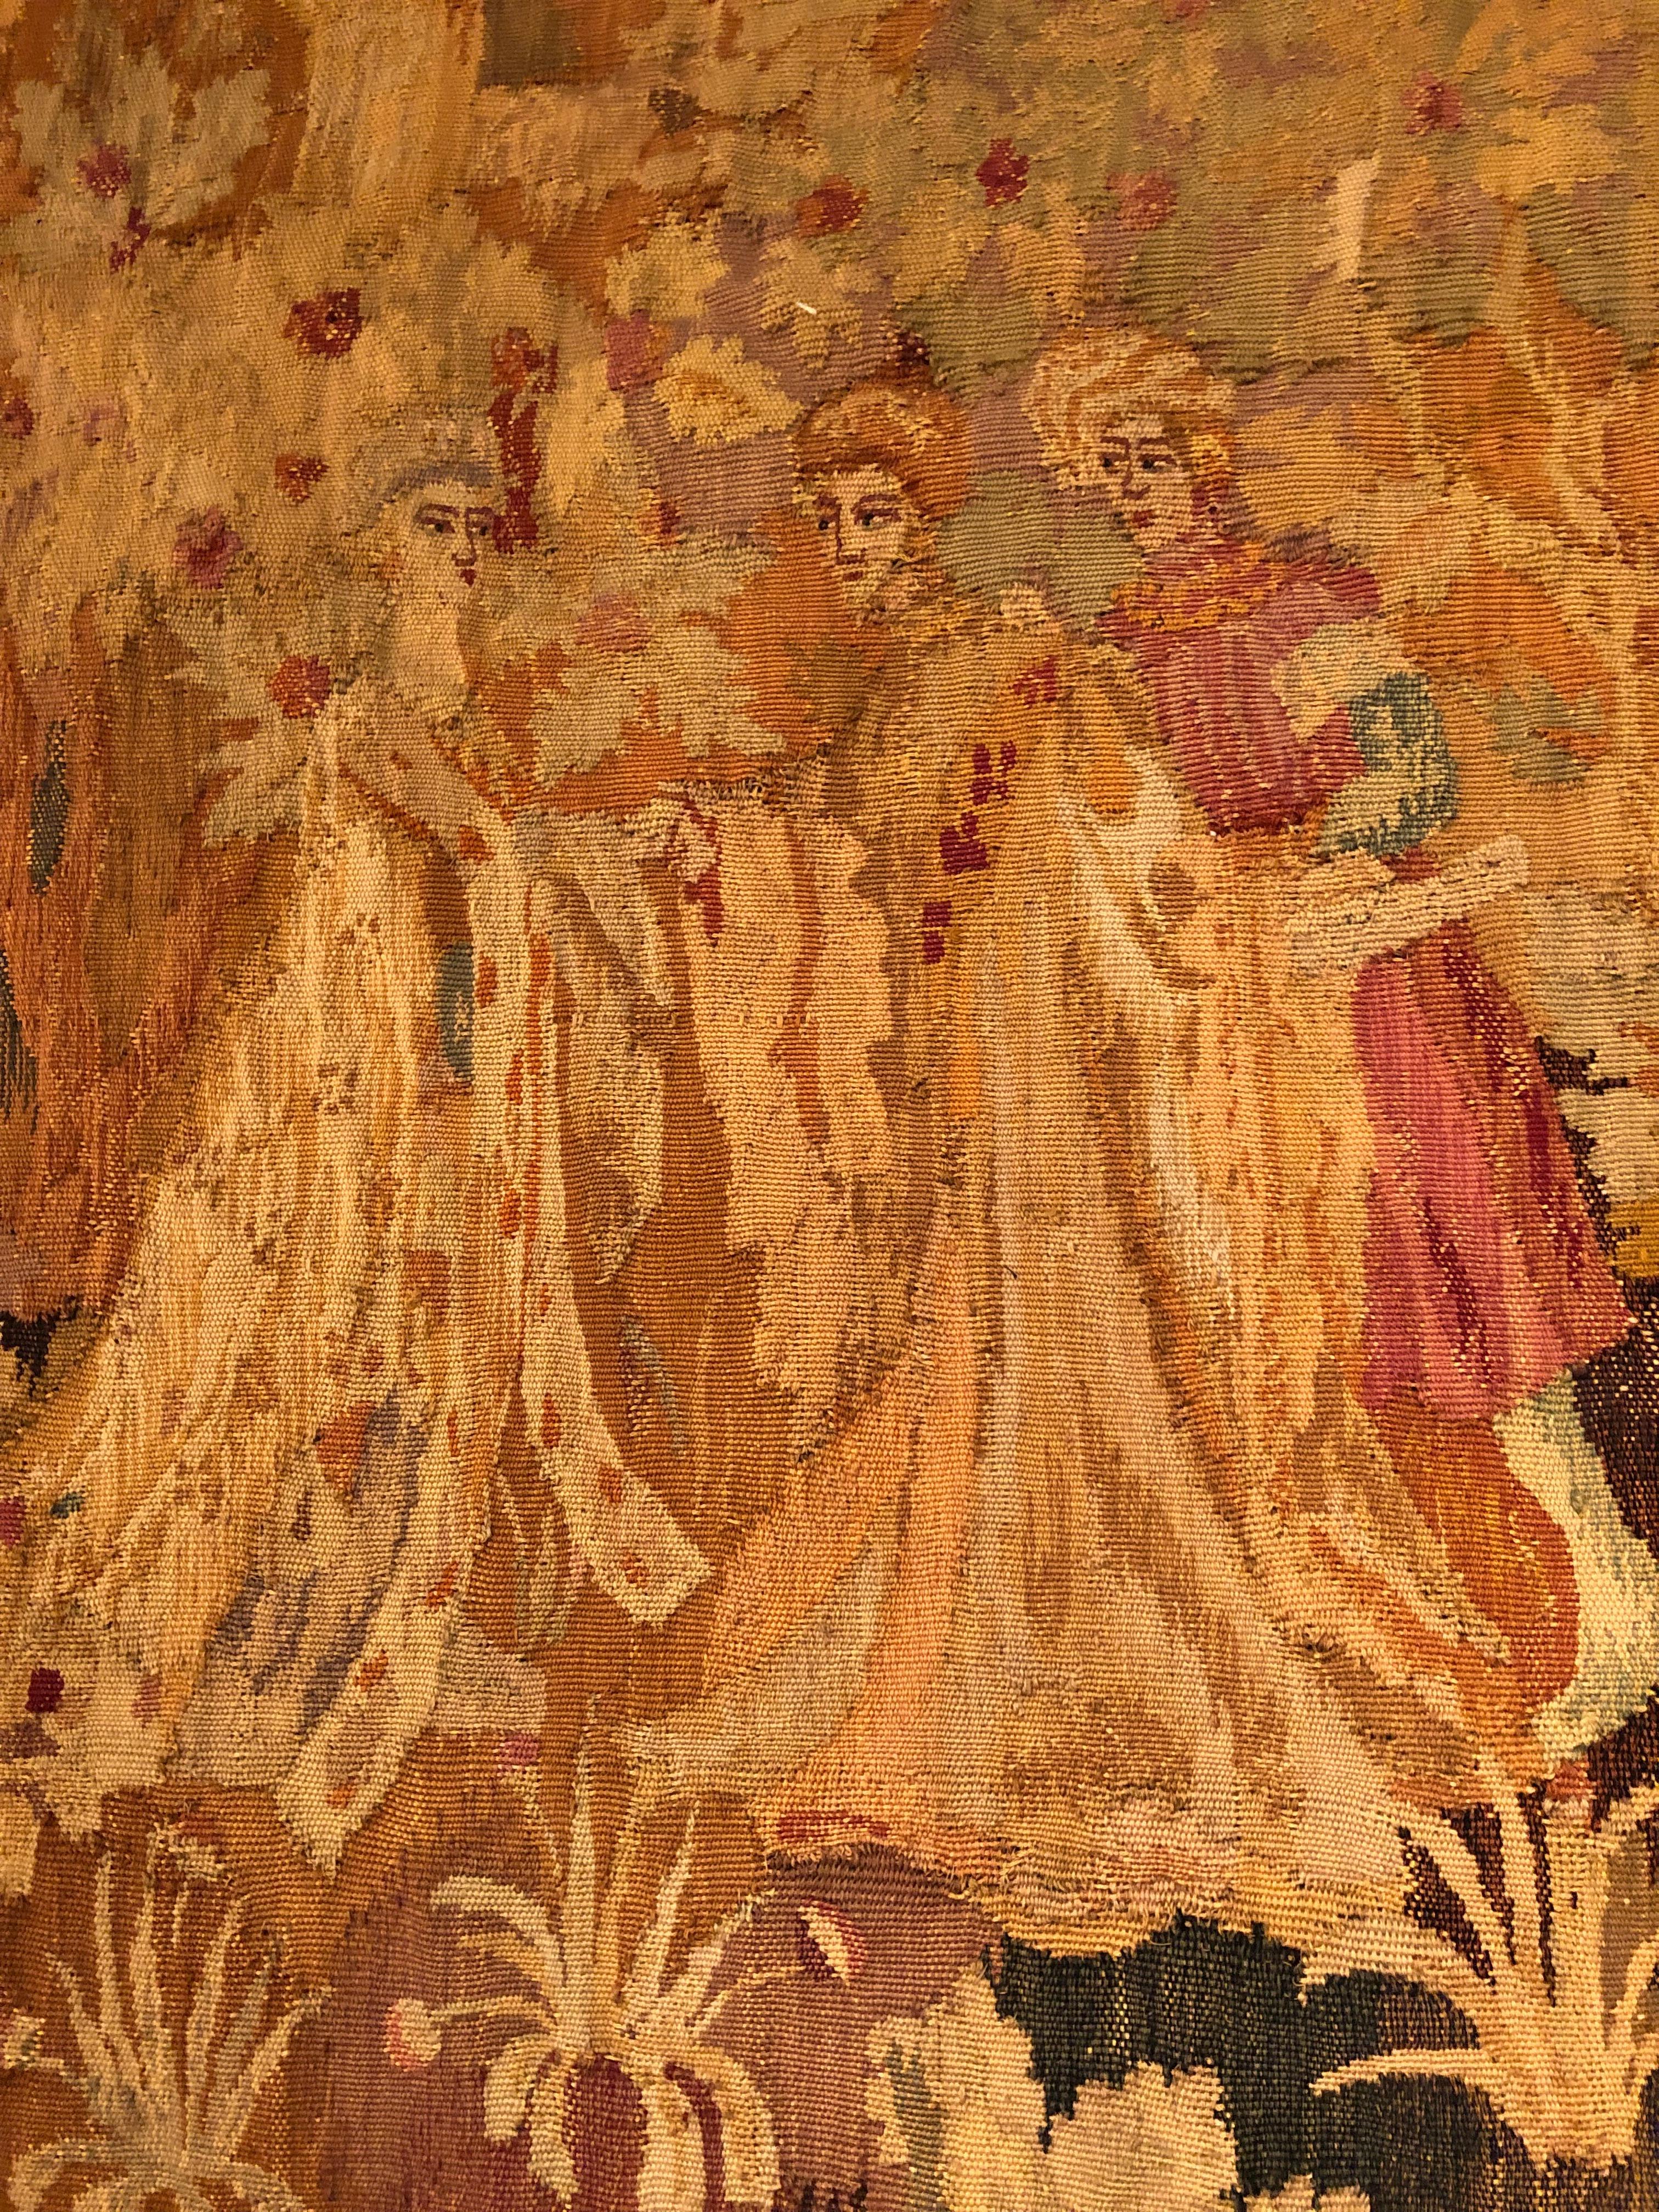 Gorgeous antique French tapestry in warm autumnal shades of gold, orange, brown and green depicting a royal group of ladies and gentlemen in the foliage in front of a stately castle. Exudes character and amber glow.